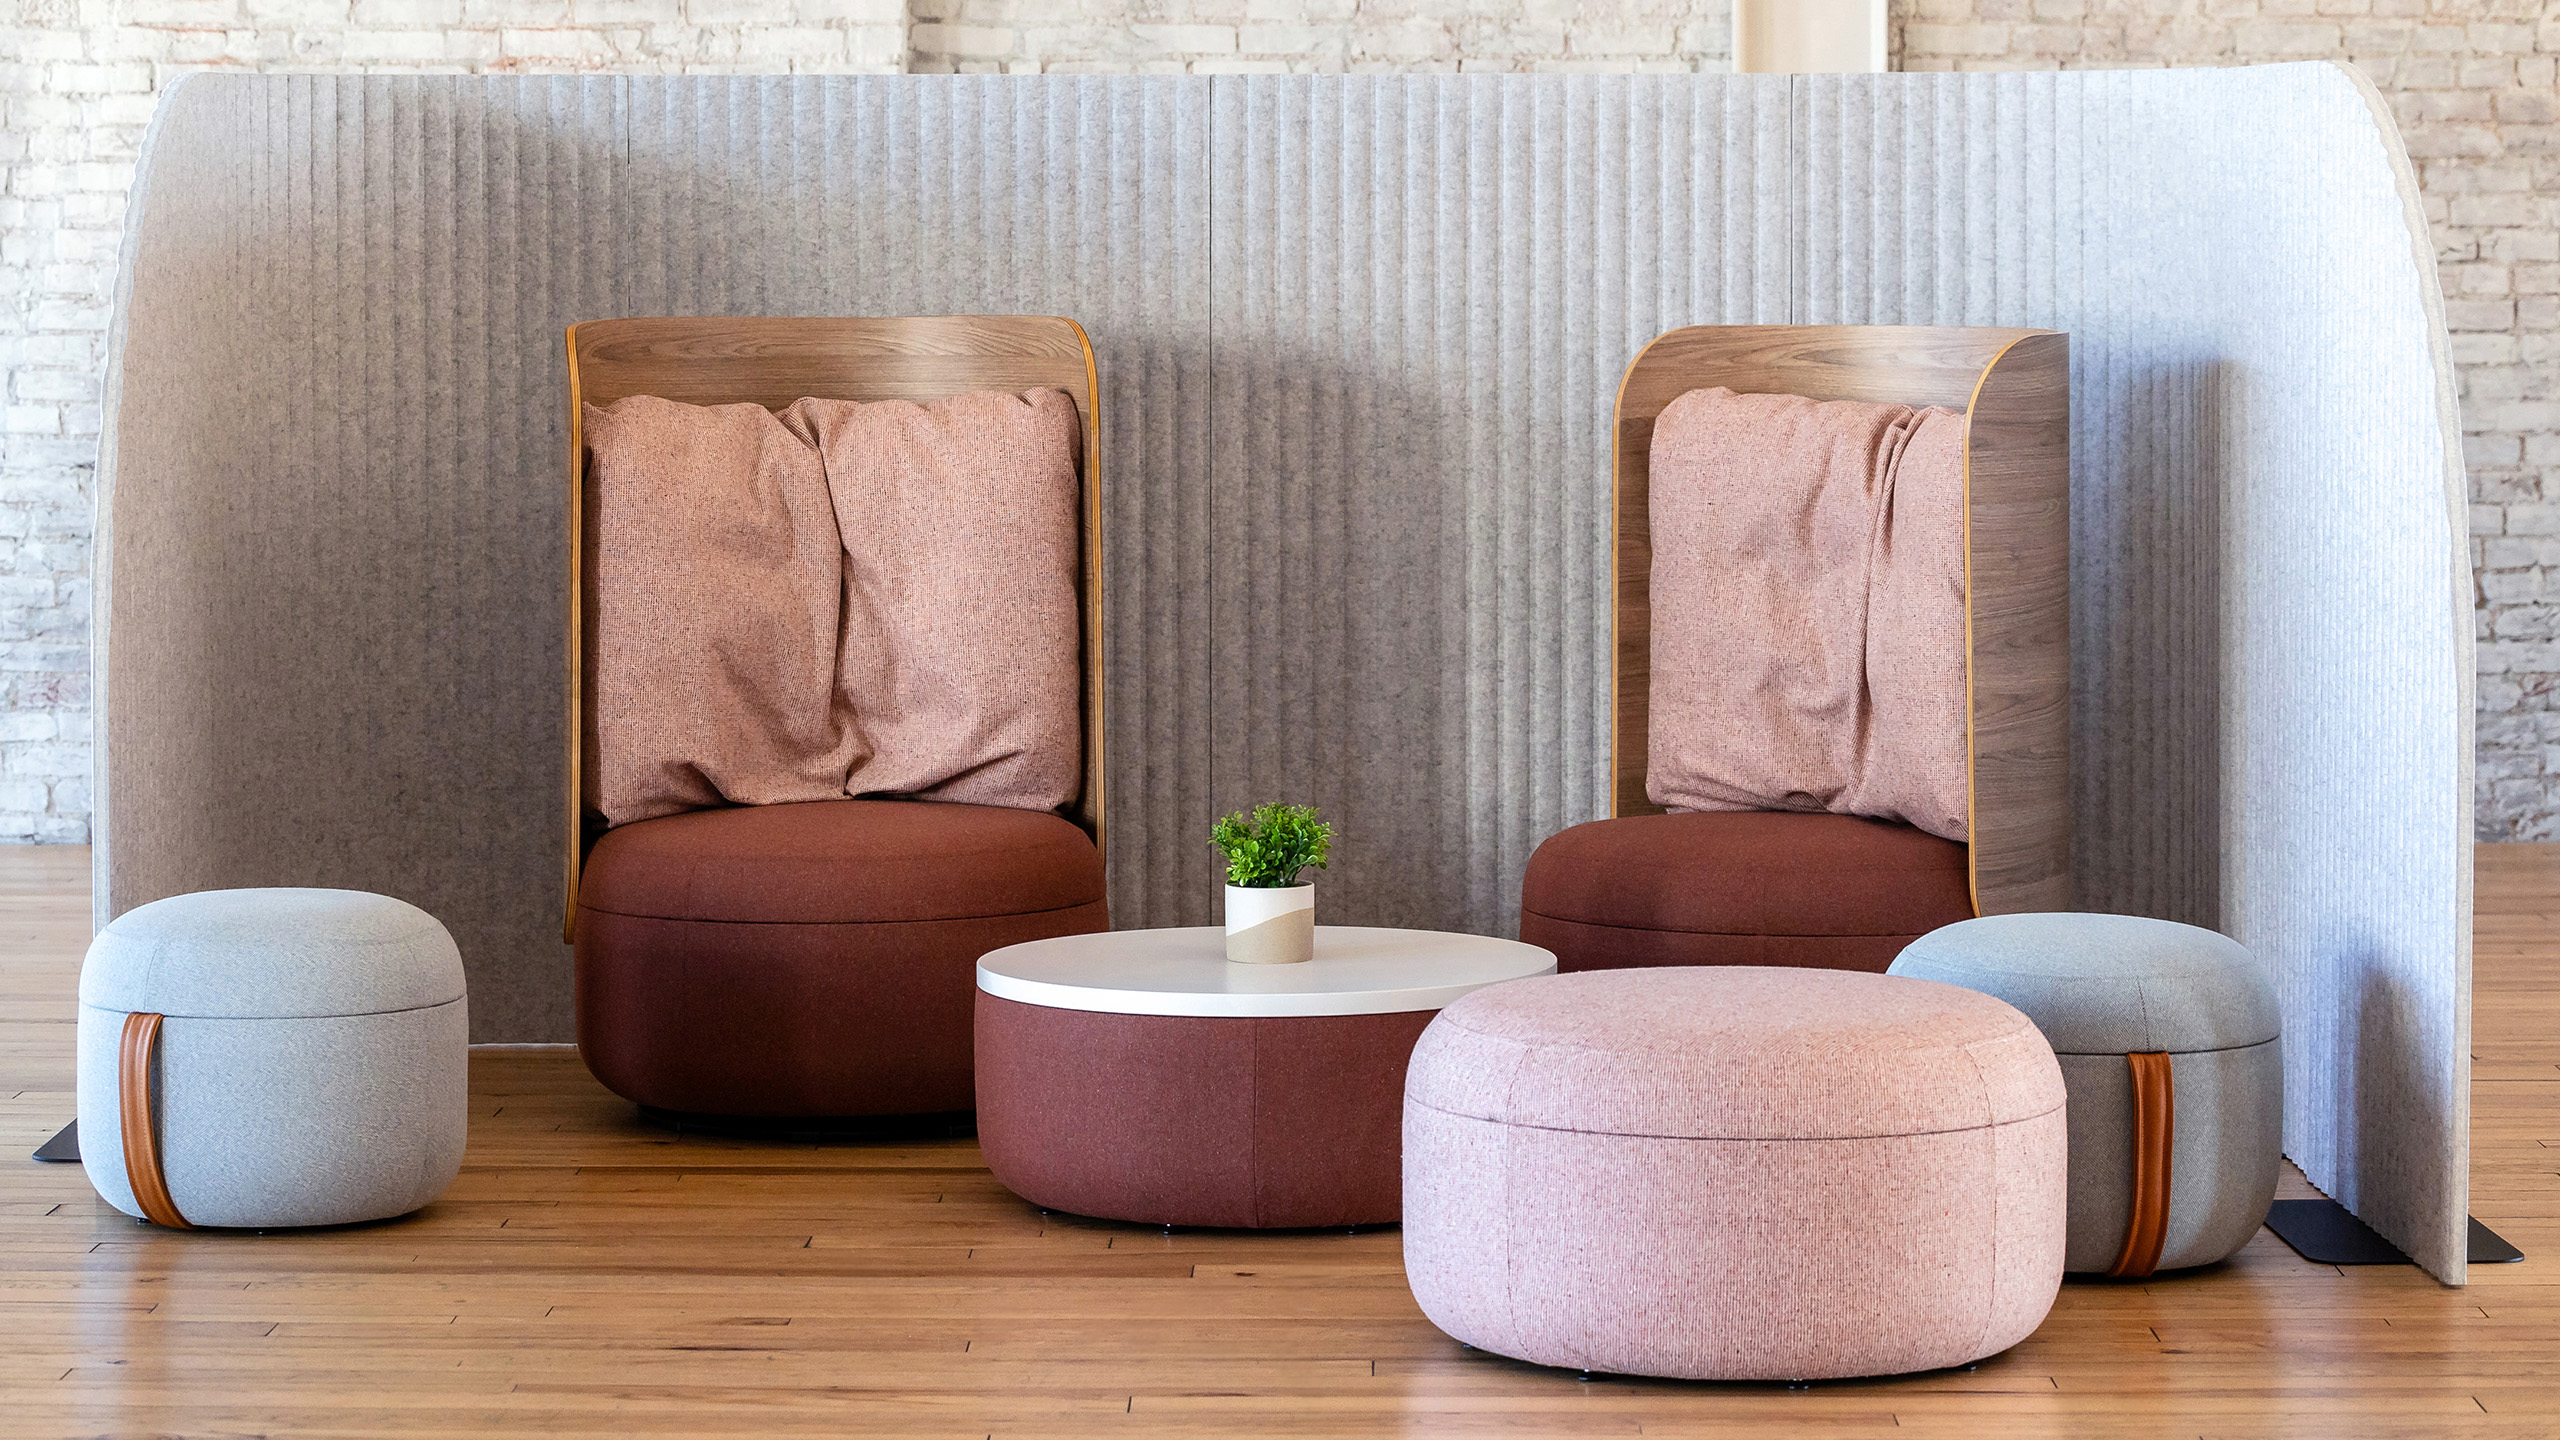 Dotti lounge collection, designed by Union Design